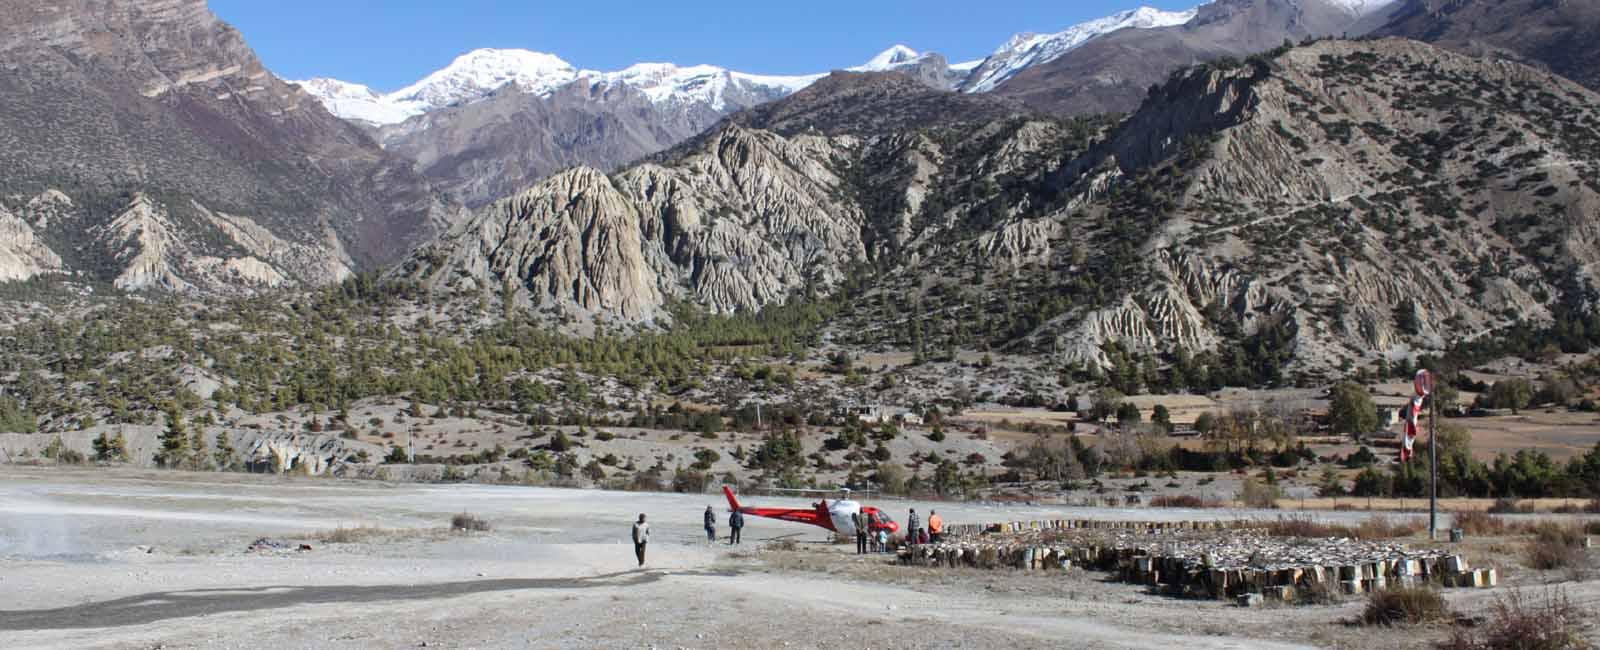 Upper Mustang helicopter tour